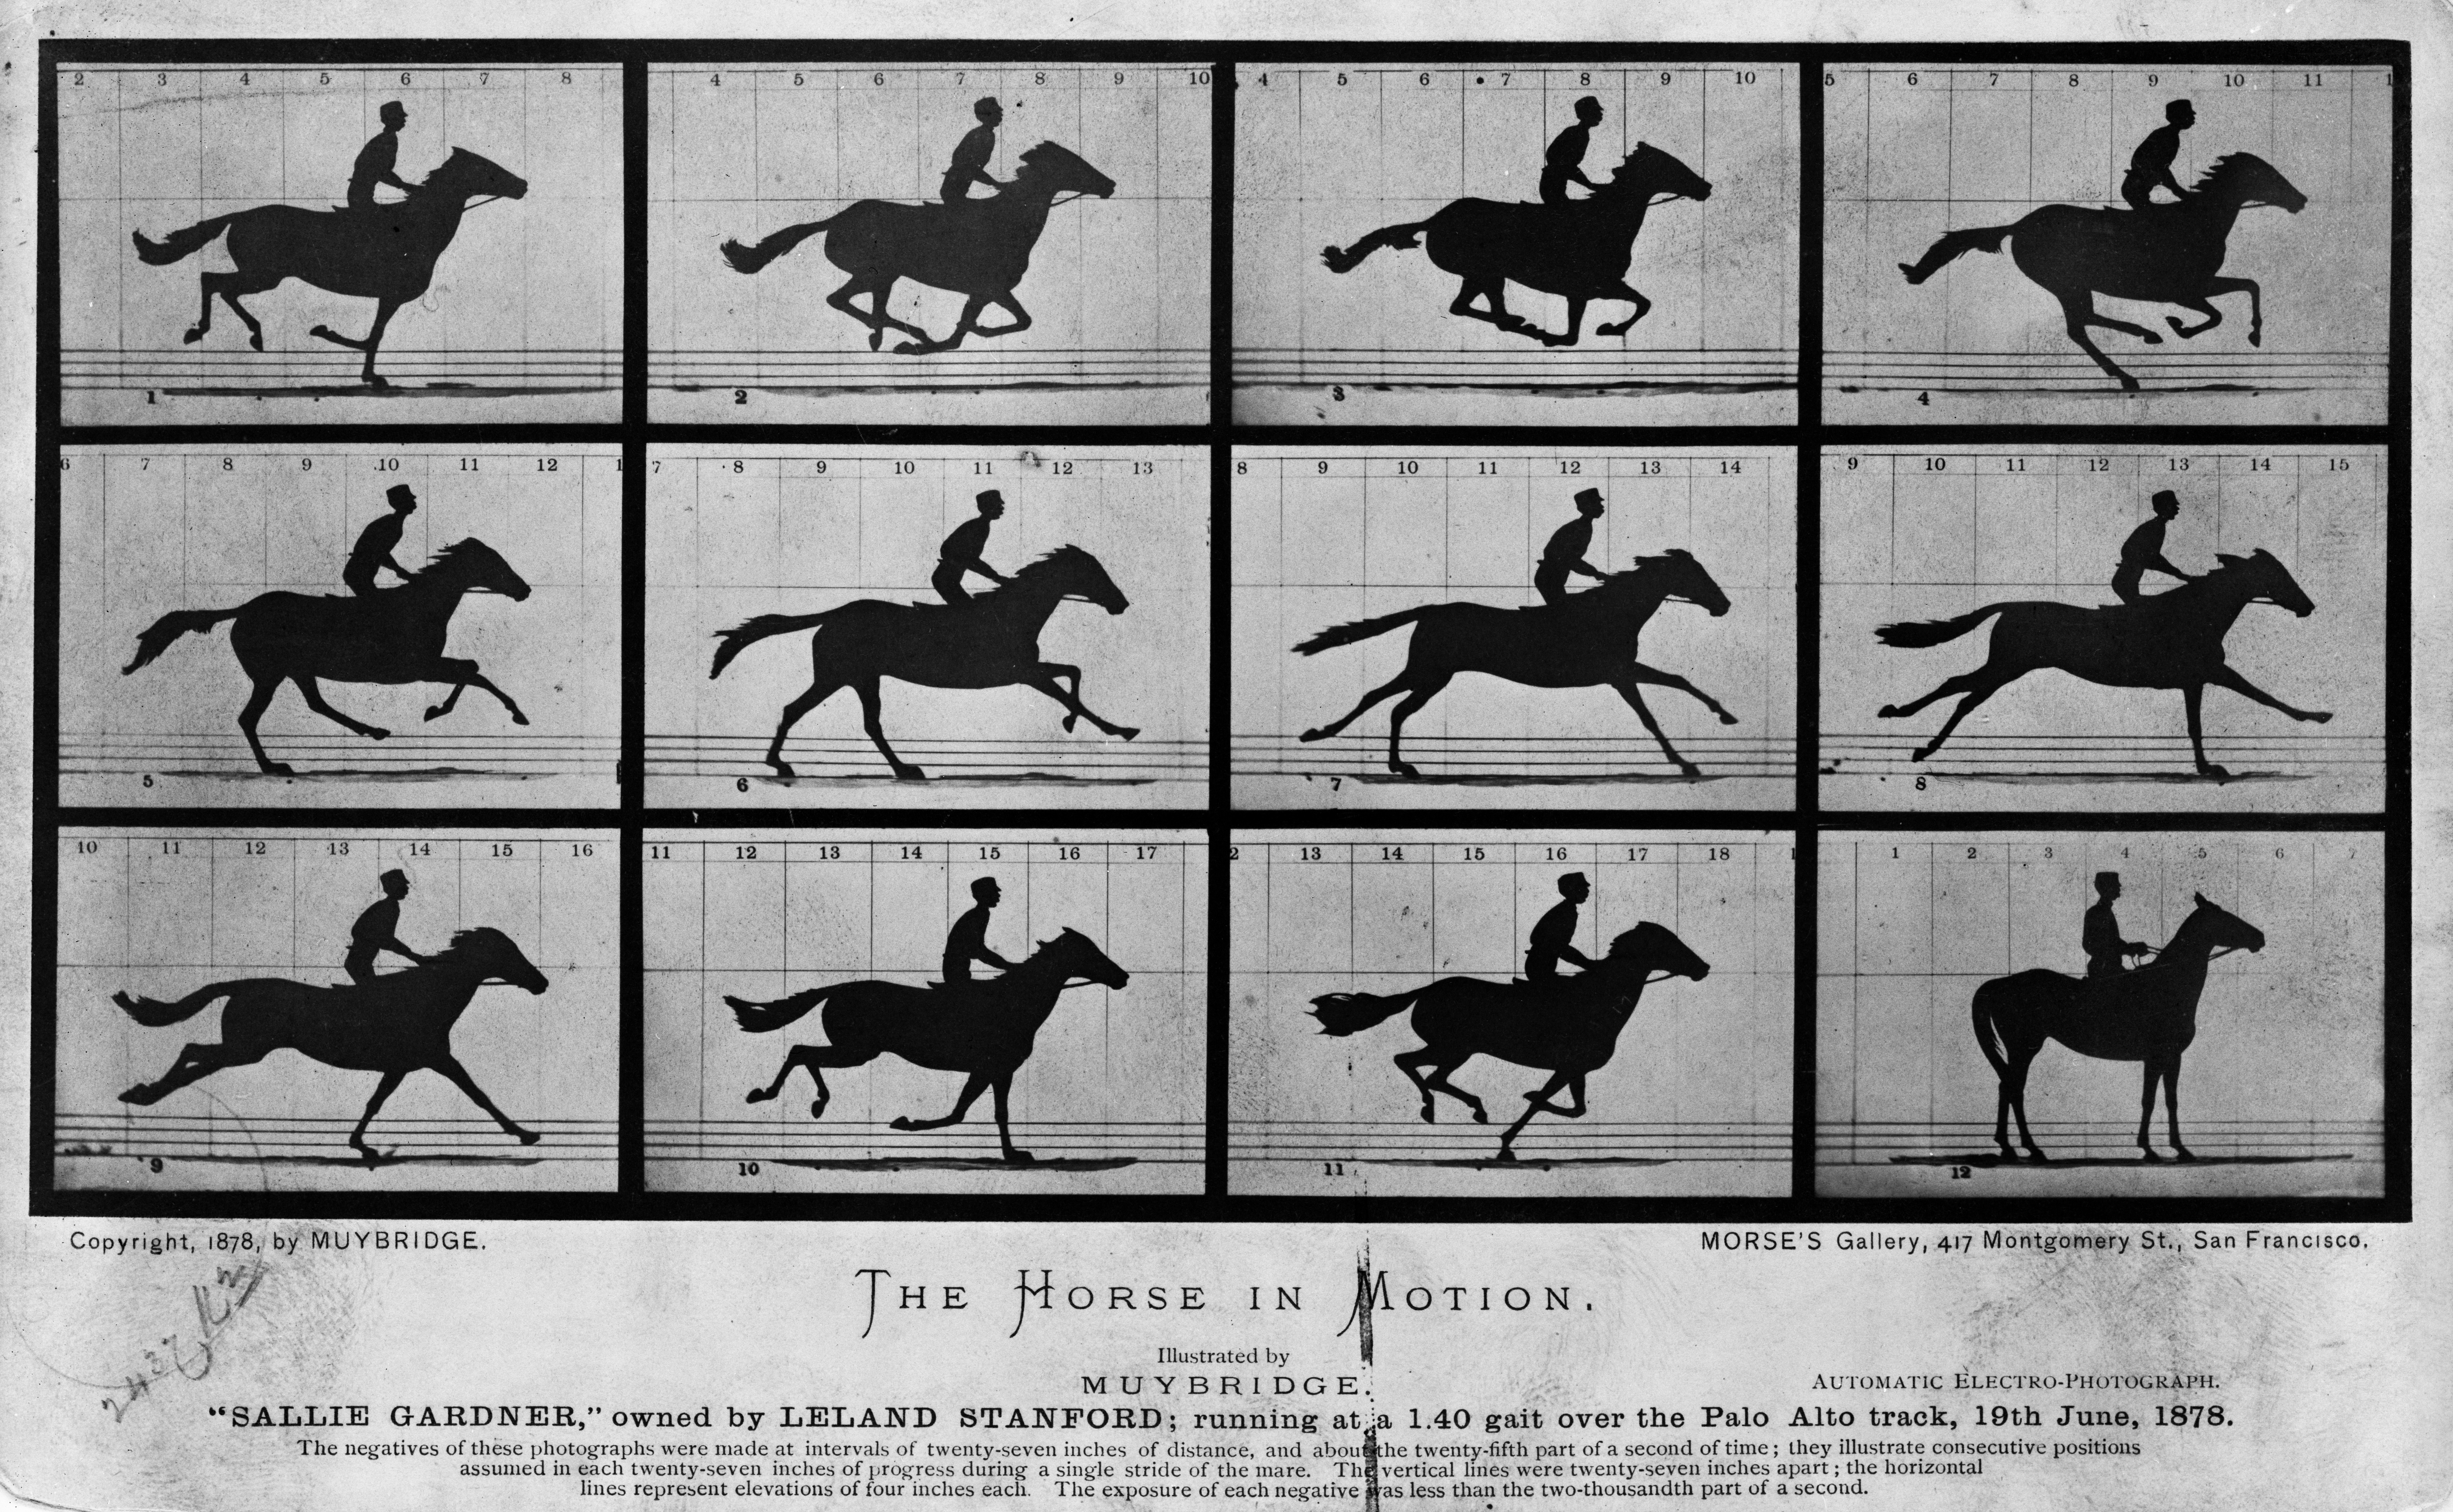 Black and white series of photographs showing the silhouettes of a horse and rider in motion. 